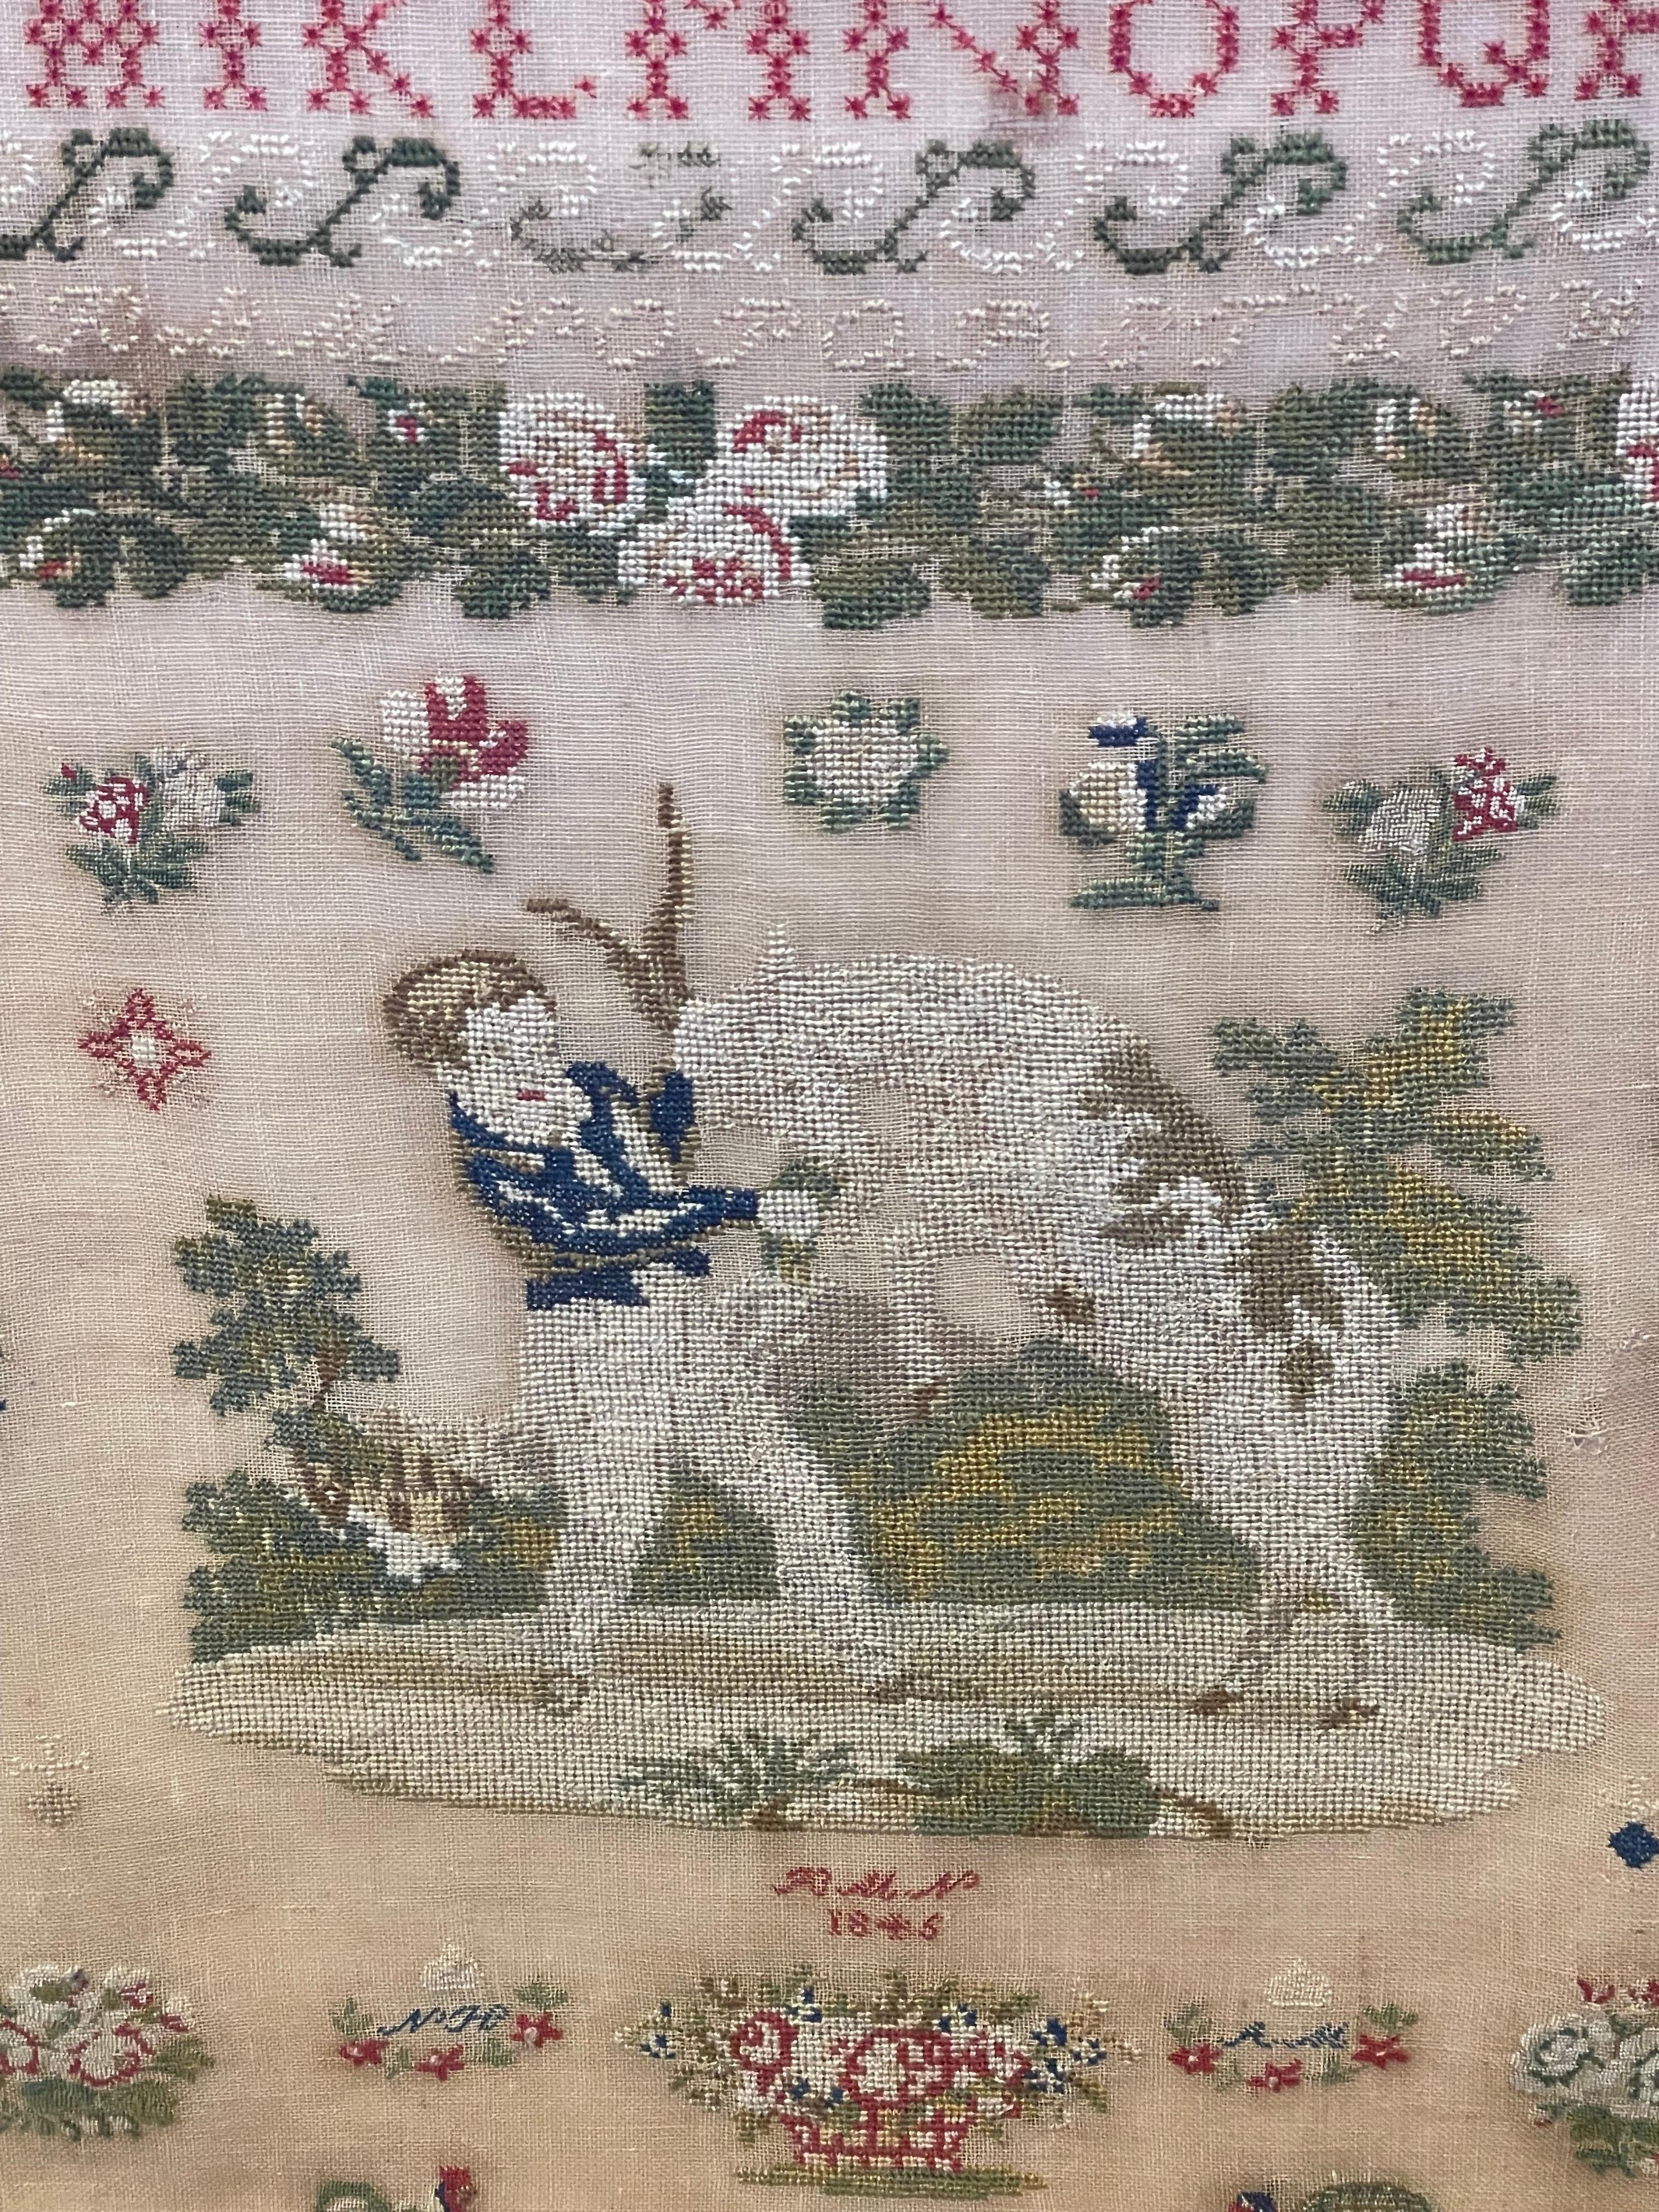 Likely English, this needlework sampler features two alphabet rows; one in block and one in script. The central motif features a boy with a handful of carrots a pony on its hind legs, with lower initials 